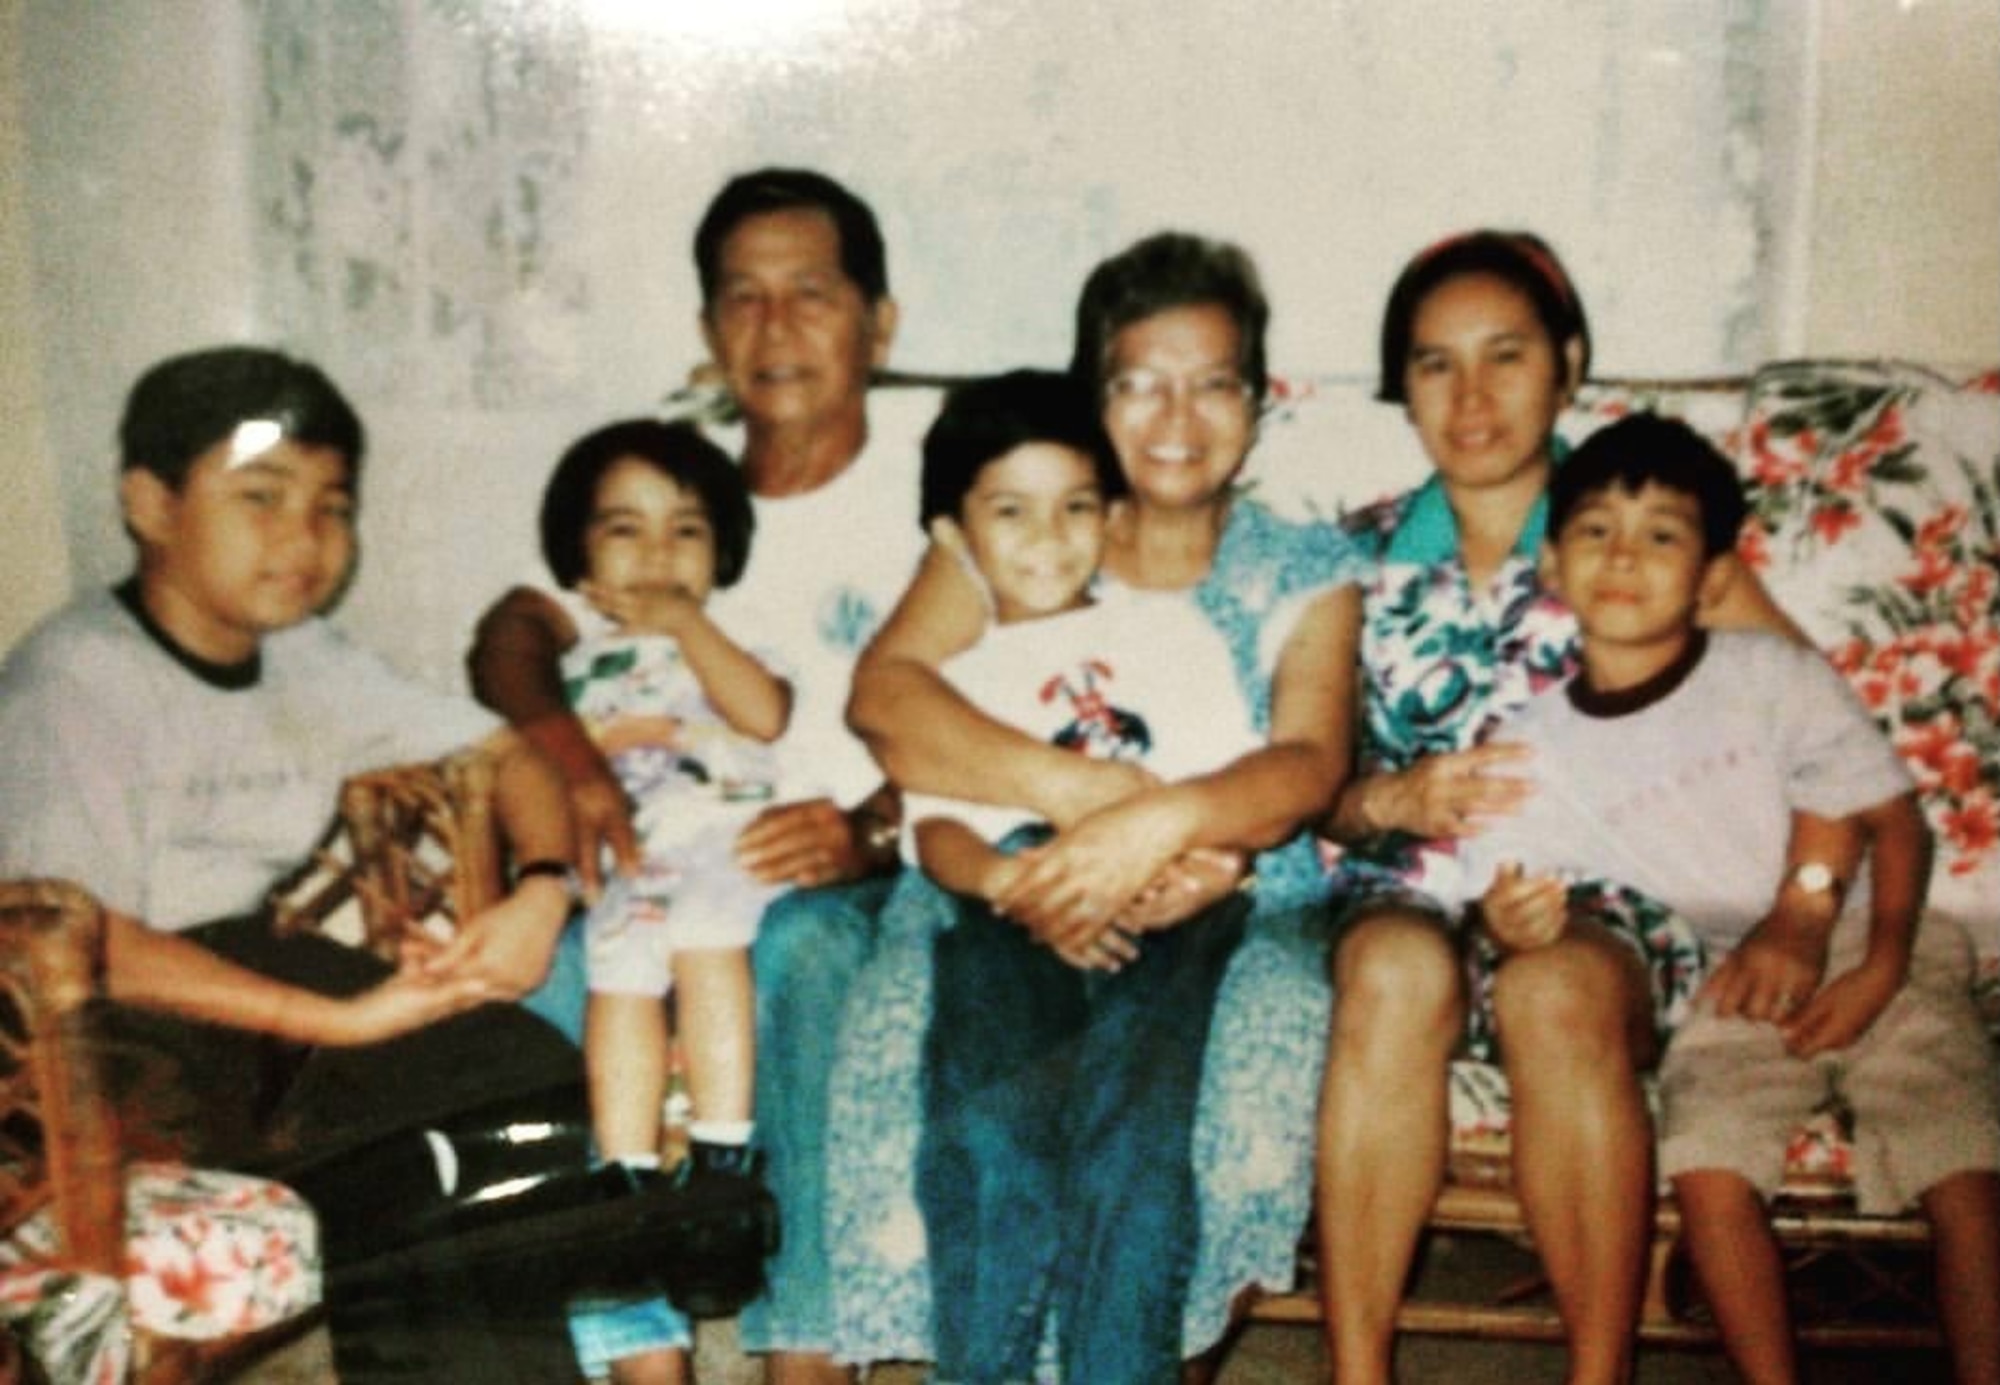 This photo is of Tech. Sgt. Leo Mangahas' family in the Philippines when he was a child.